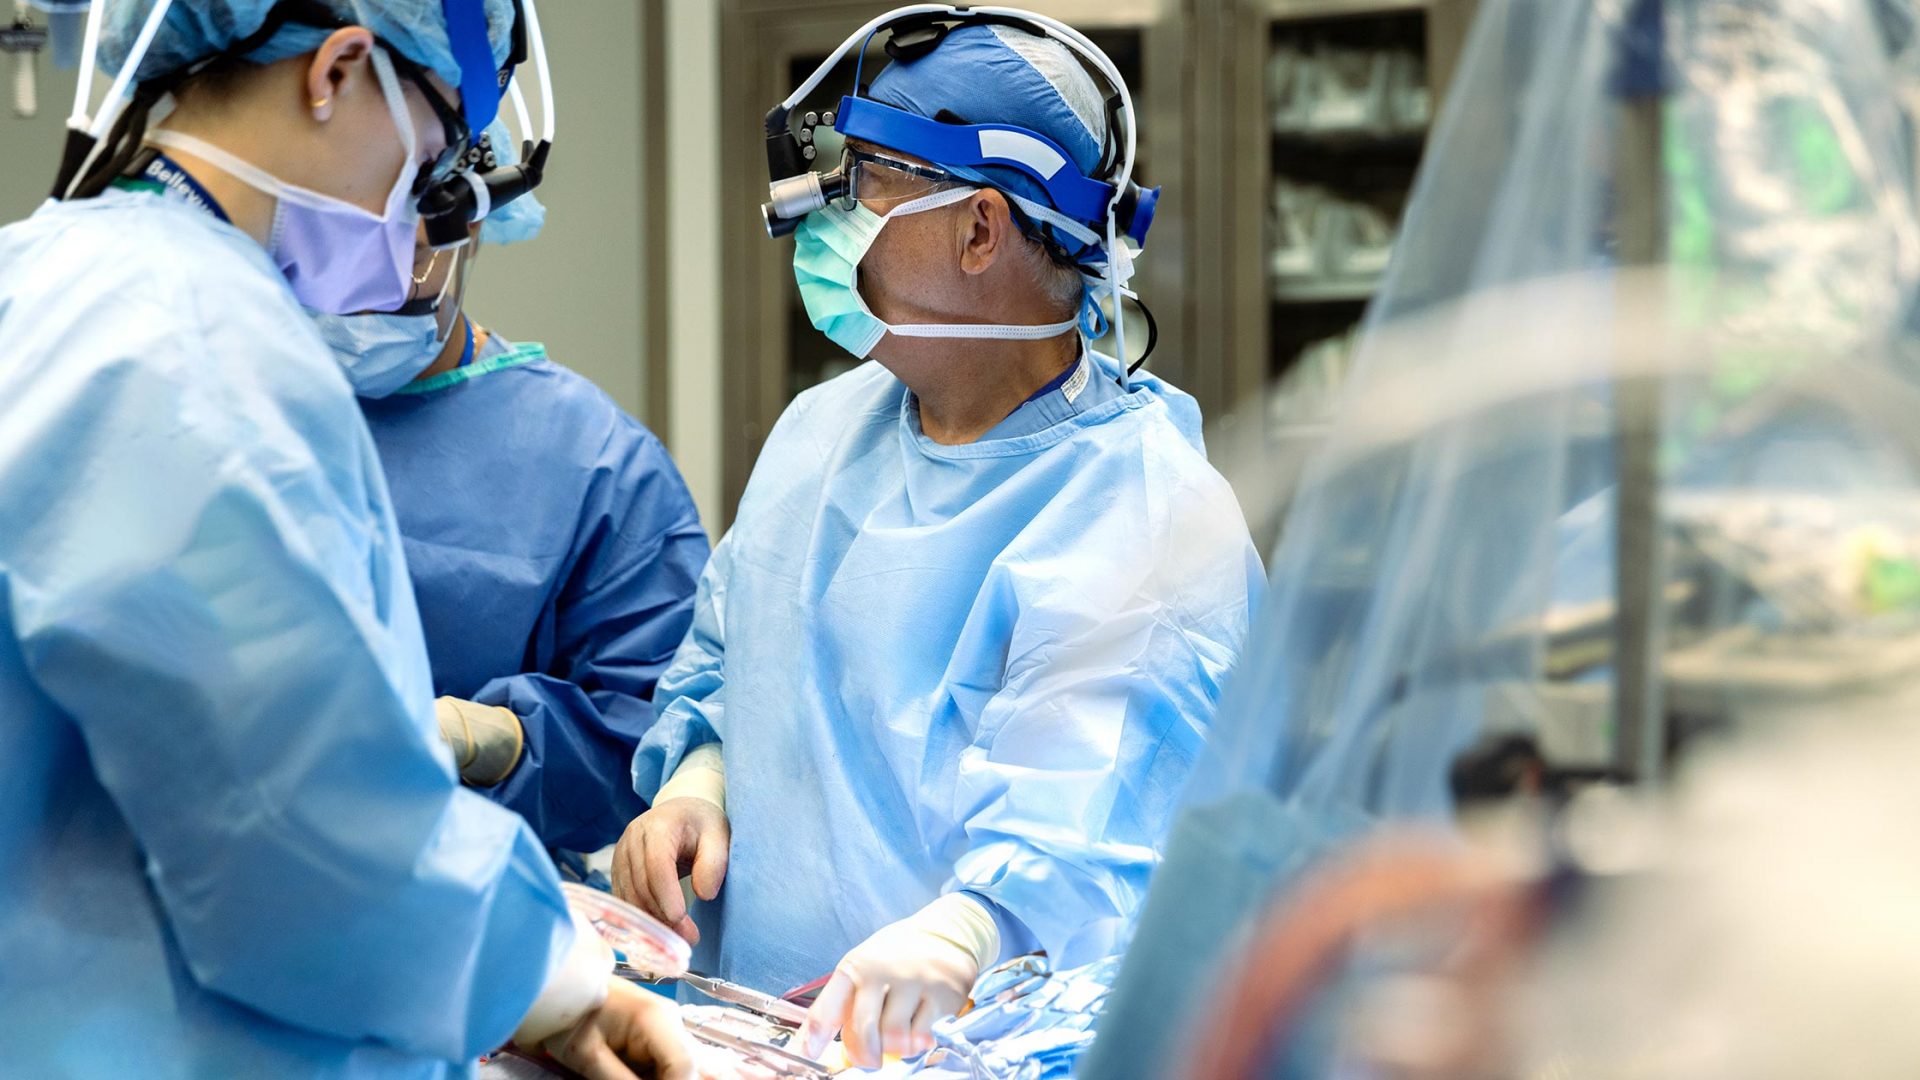 Dr. Elias A. Zias and team performing coronary artery bypass grafting in operating room.